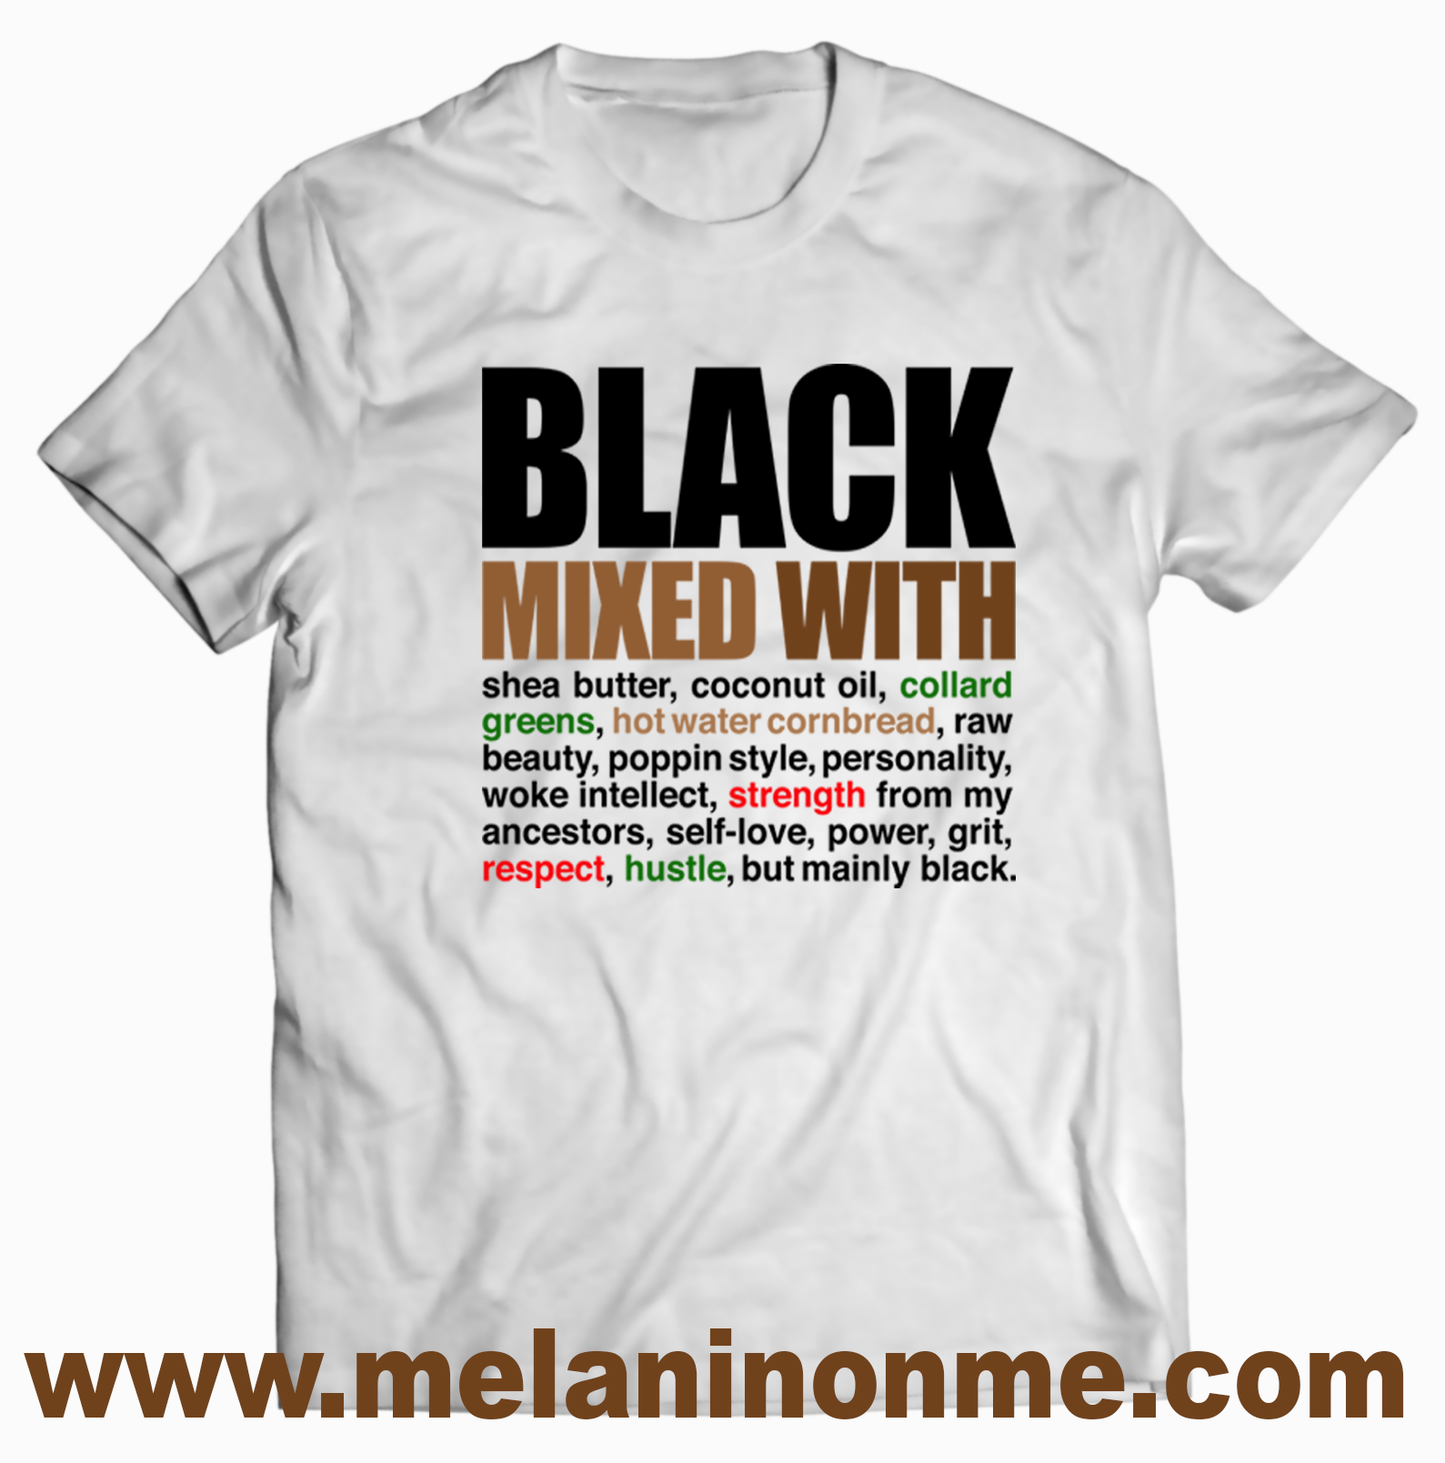 Black Mixed With (Limited Edition) Tshirt - Unisex